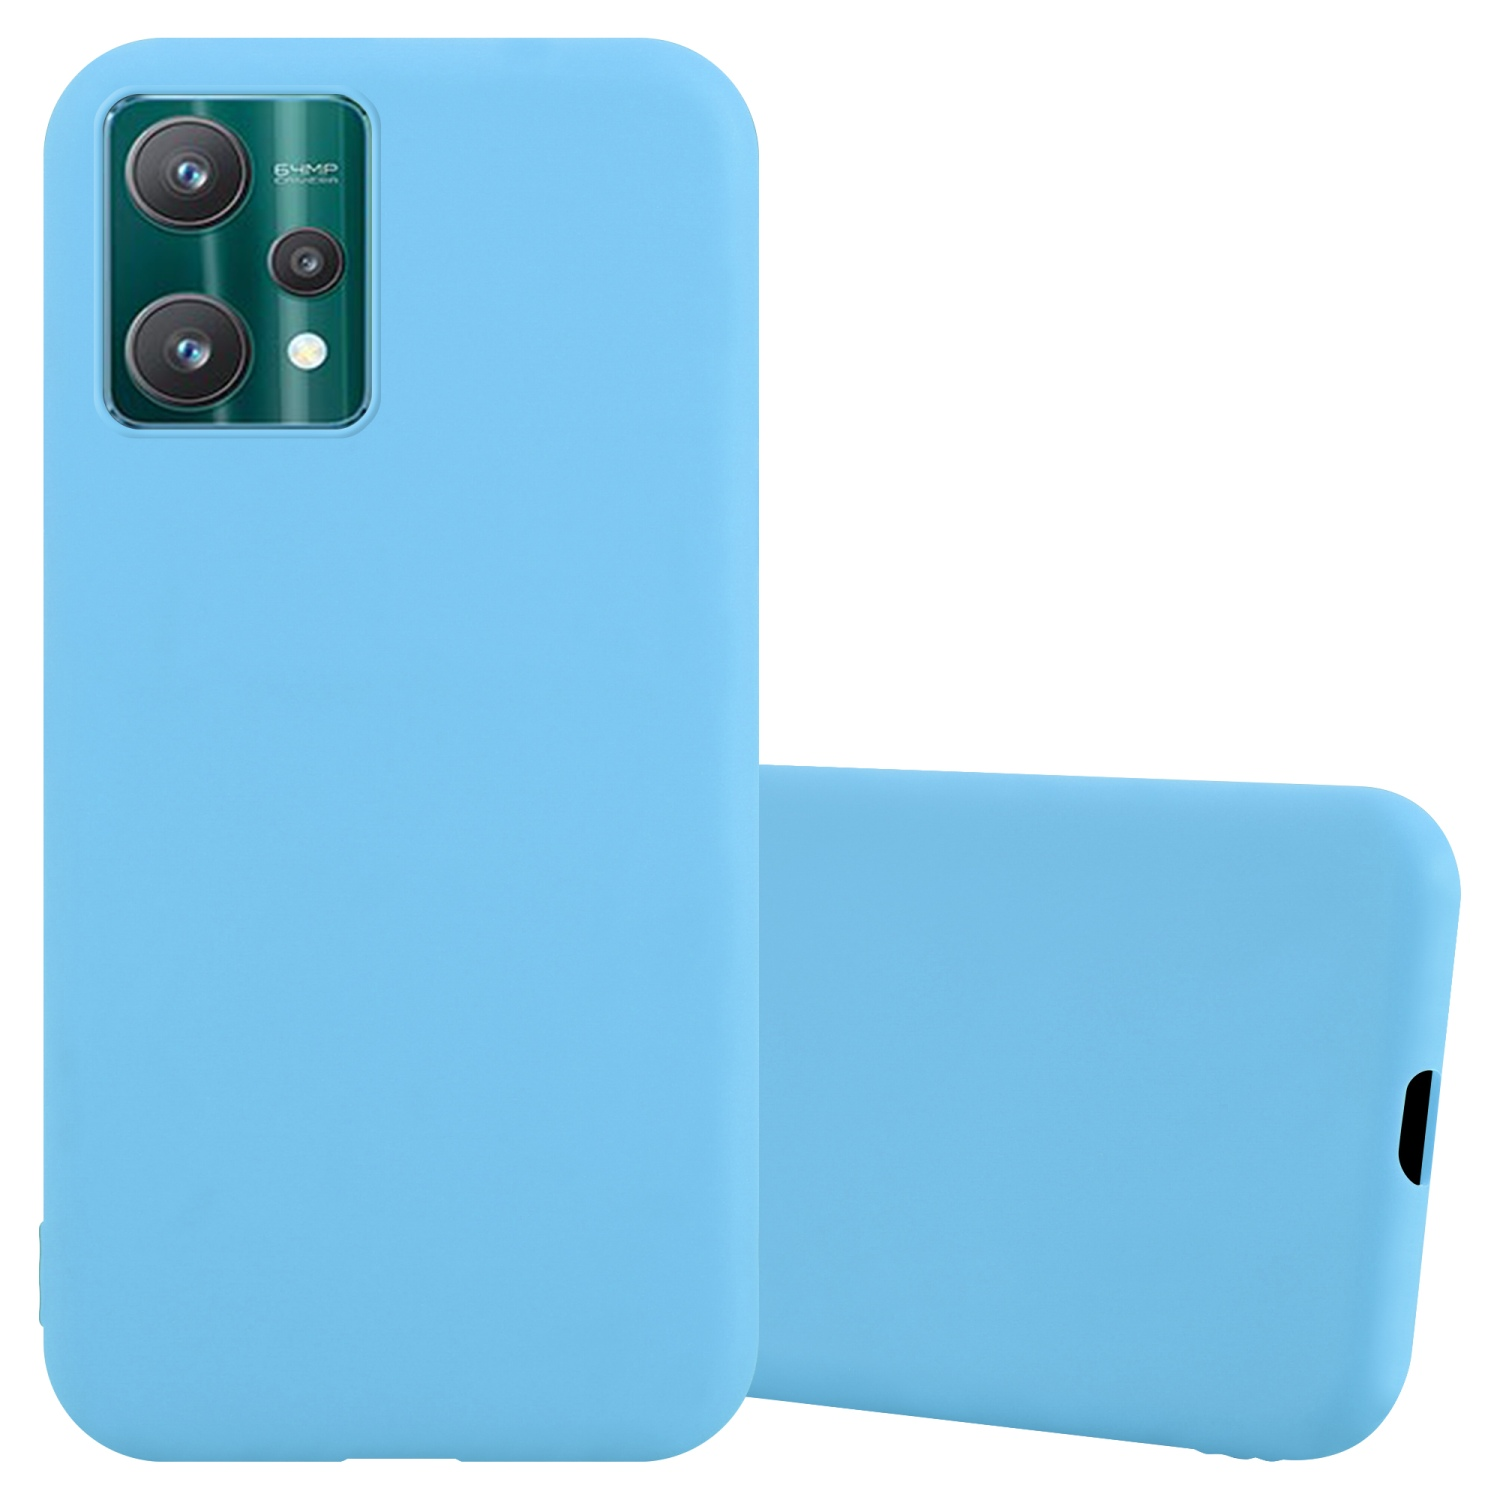 Nord LITE Hülle 9 CE im OnePlus CADORABO Style, BLAU 5G / Realme, 9 / Q5 PRO 5G, / 2 Backcover, TPU V25 Candy CANDY /